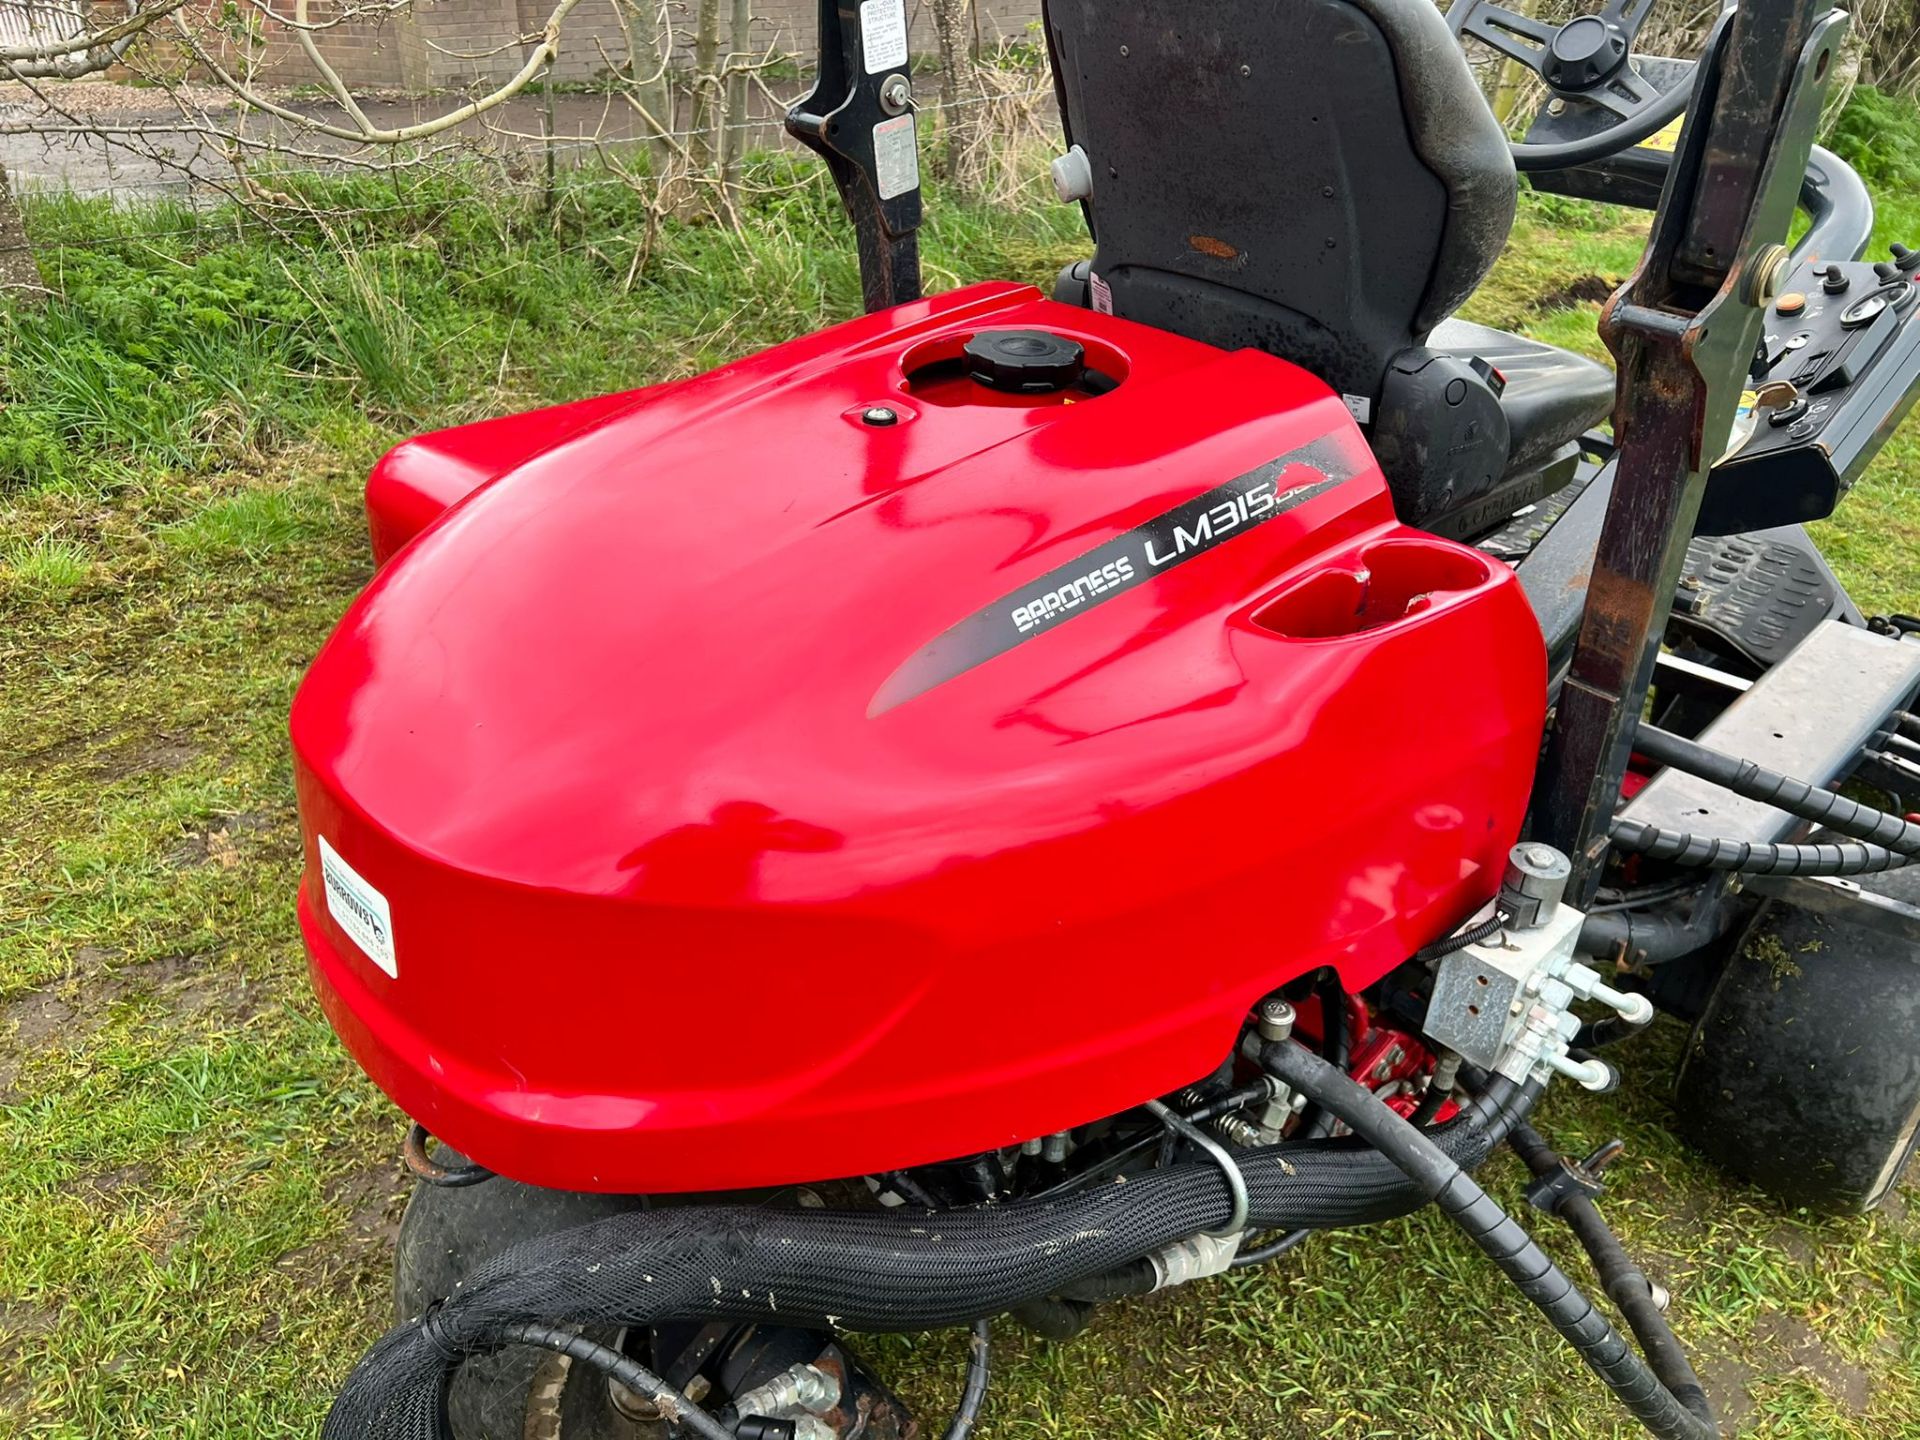 2014 Baroness LM315GC 3WD Diesel Cylinder Mower With Grass Boxes, Runs Drives Cuts Collects - Image 23 of 23